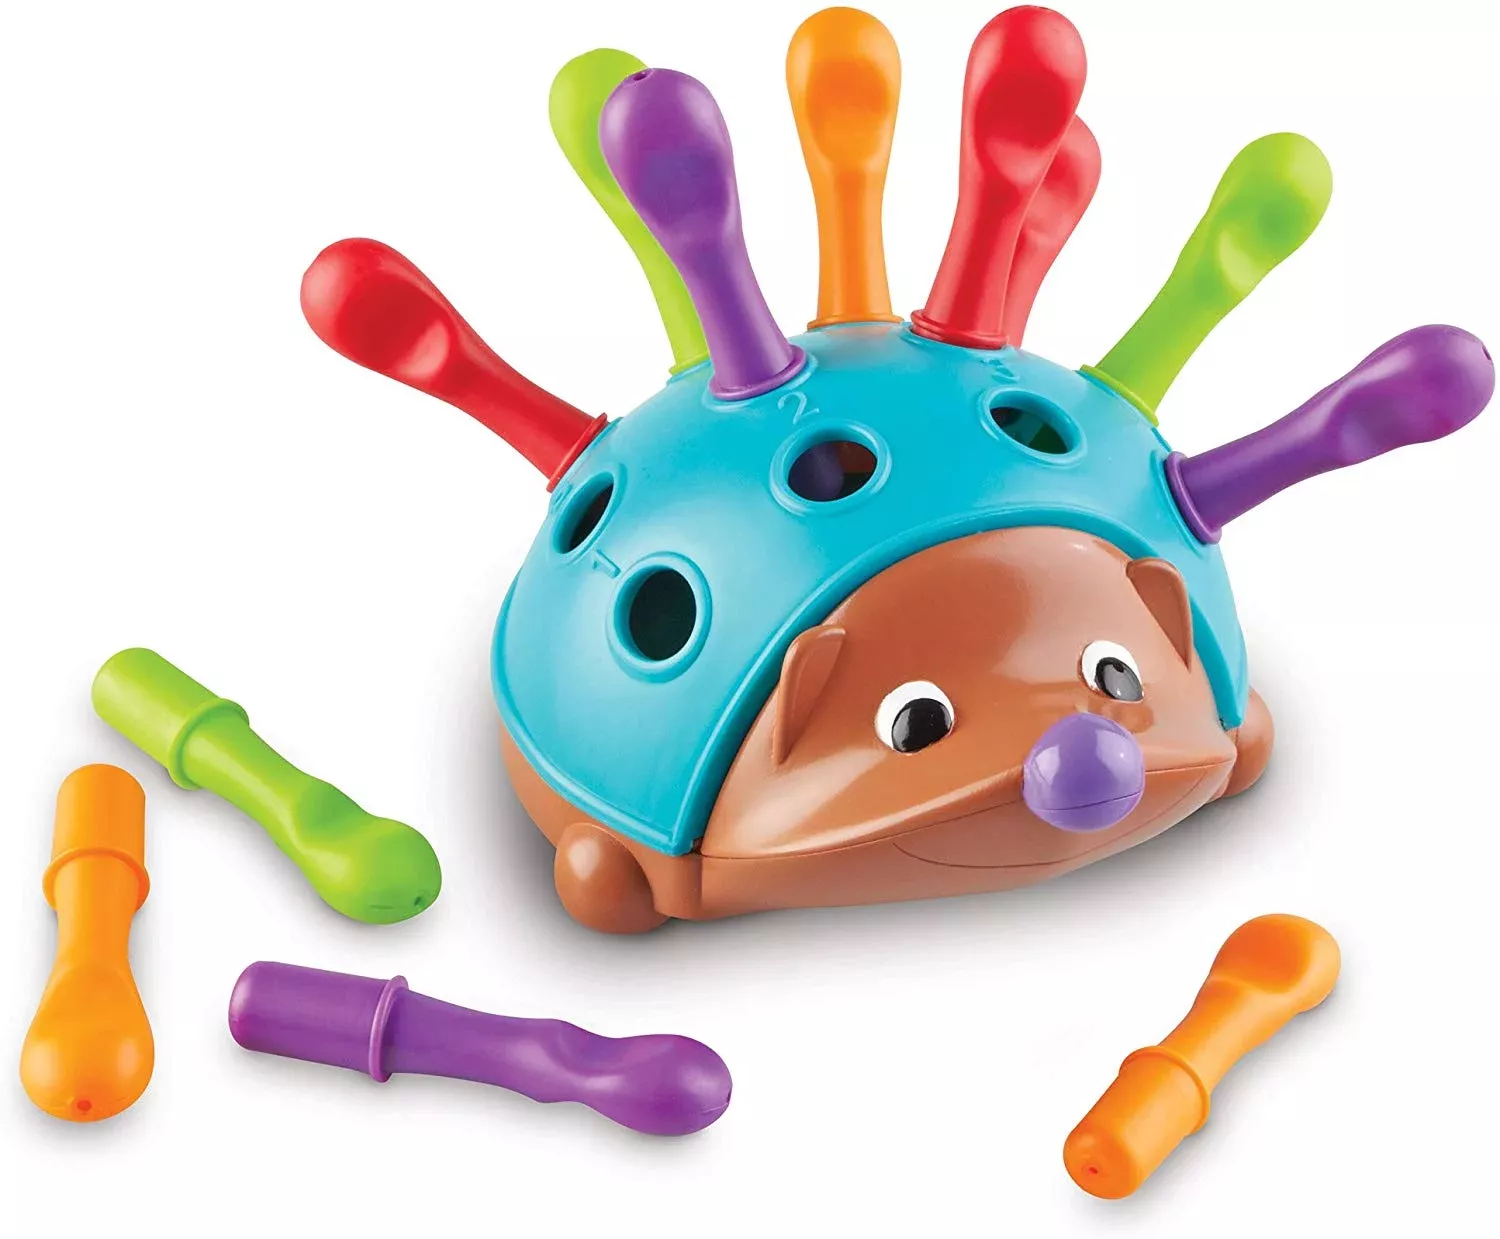 Best Gifts For Two Year Old 2023: Spike the Hedgehog Toy 2023